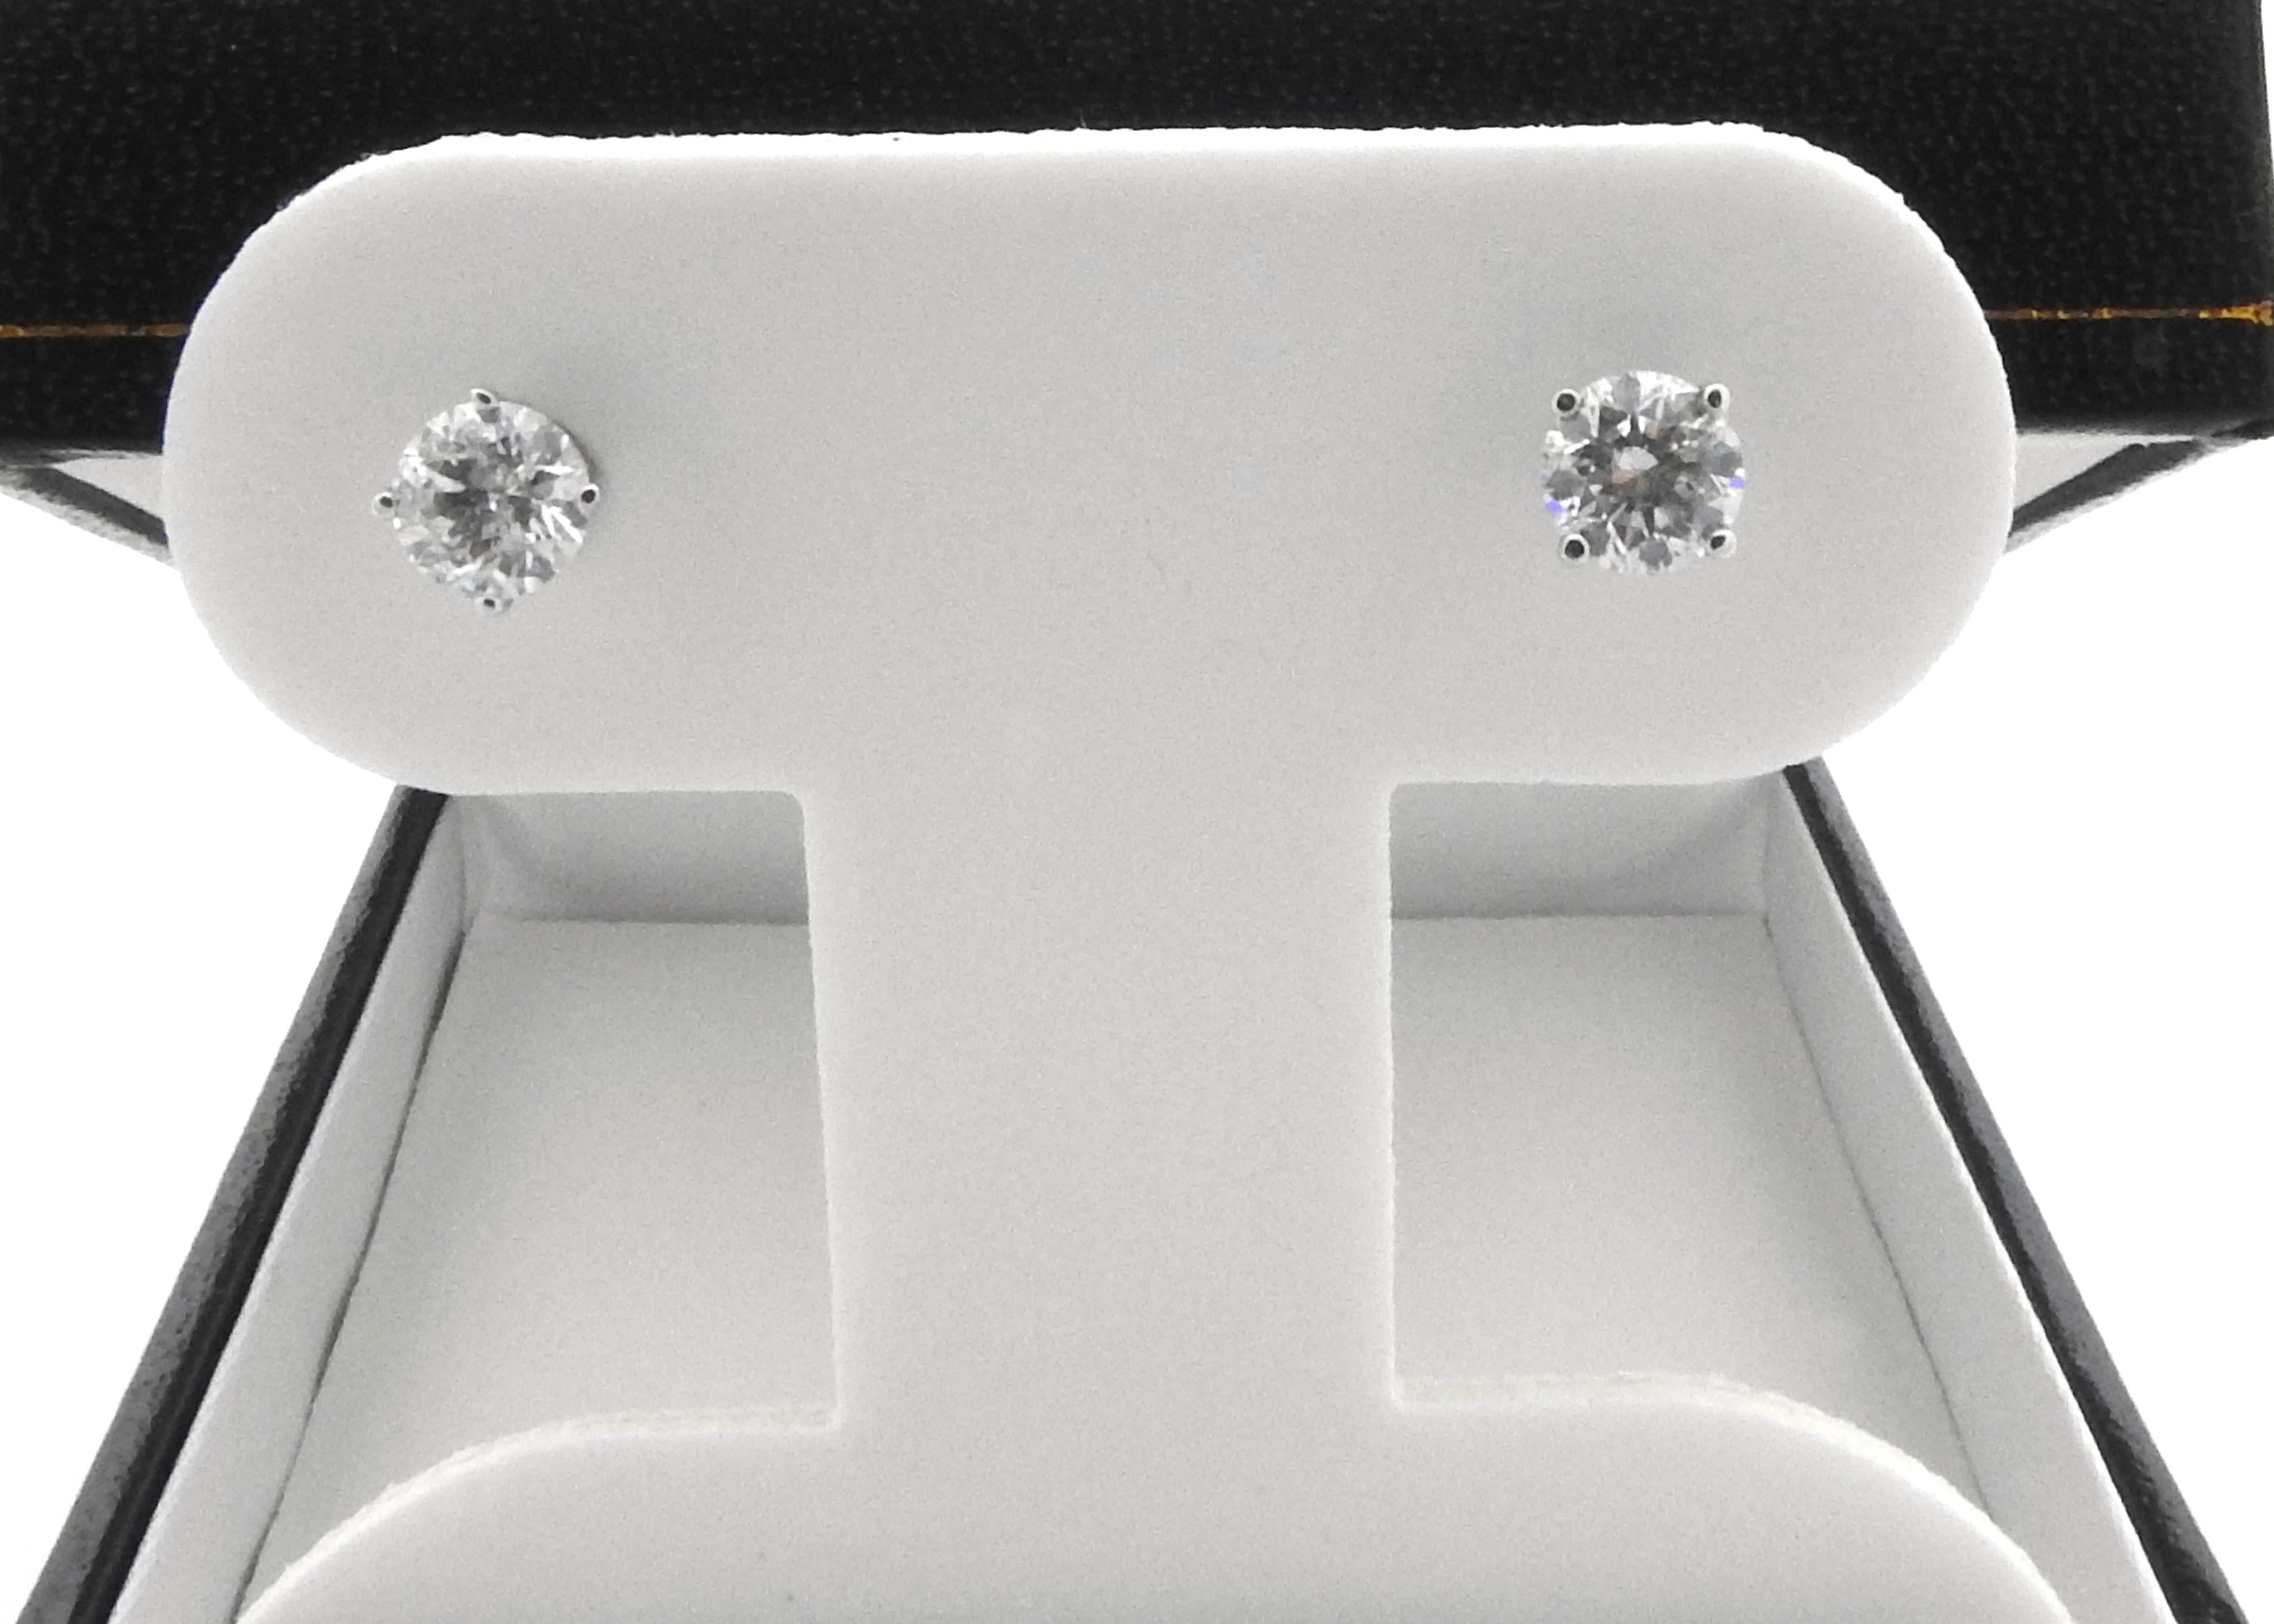 Vintage 14 Karat White Gold Diamond Stud Earrings-

These exquisite earrings each feature one round brilliant cut diamond set in classic 14K white gold. Screw back closures.

Approximate total diamond weight: 1.0 ct.

Diamond color: I-J

Diamond